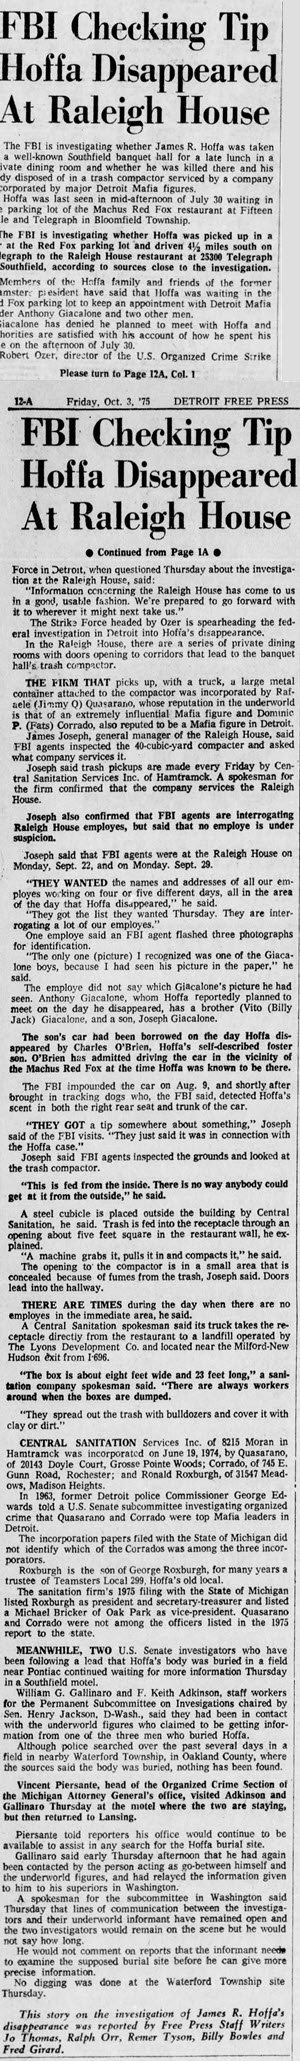 The Raleigh House - OCTOBER 1975 ARTICLE ON HOFFA SEARCH (newer photo)